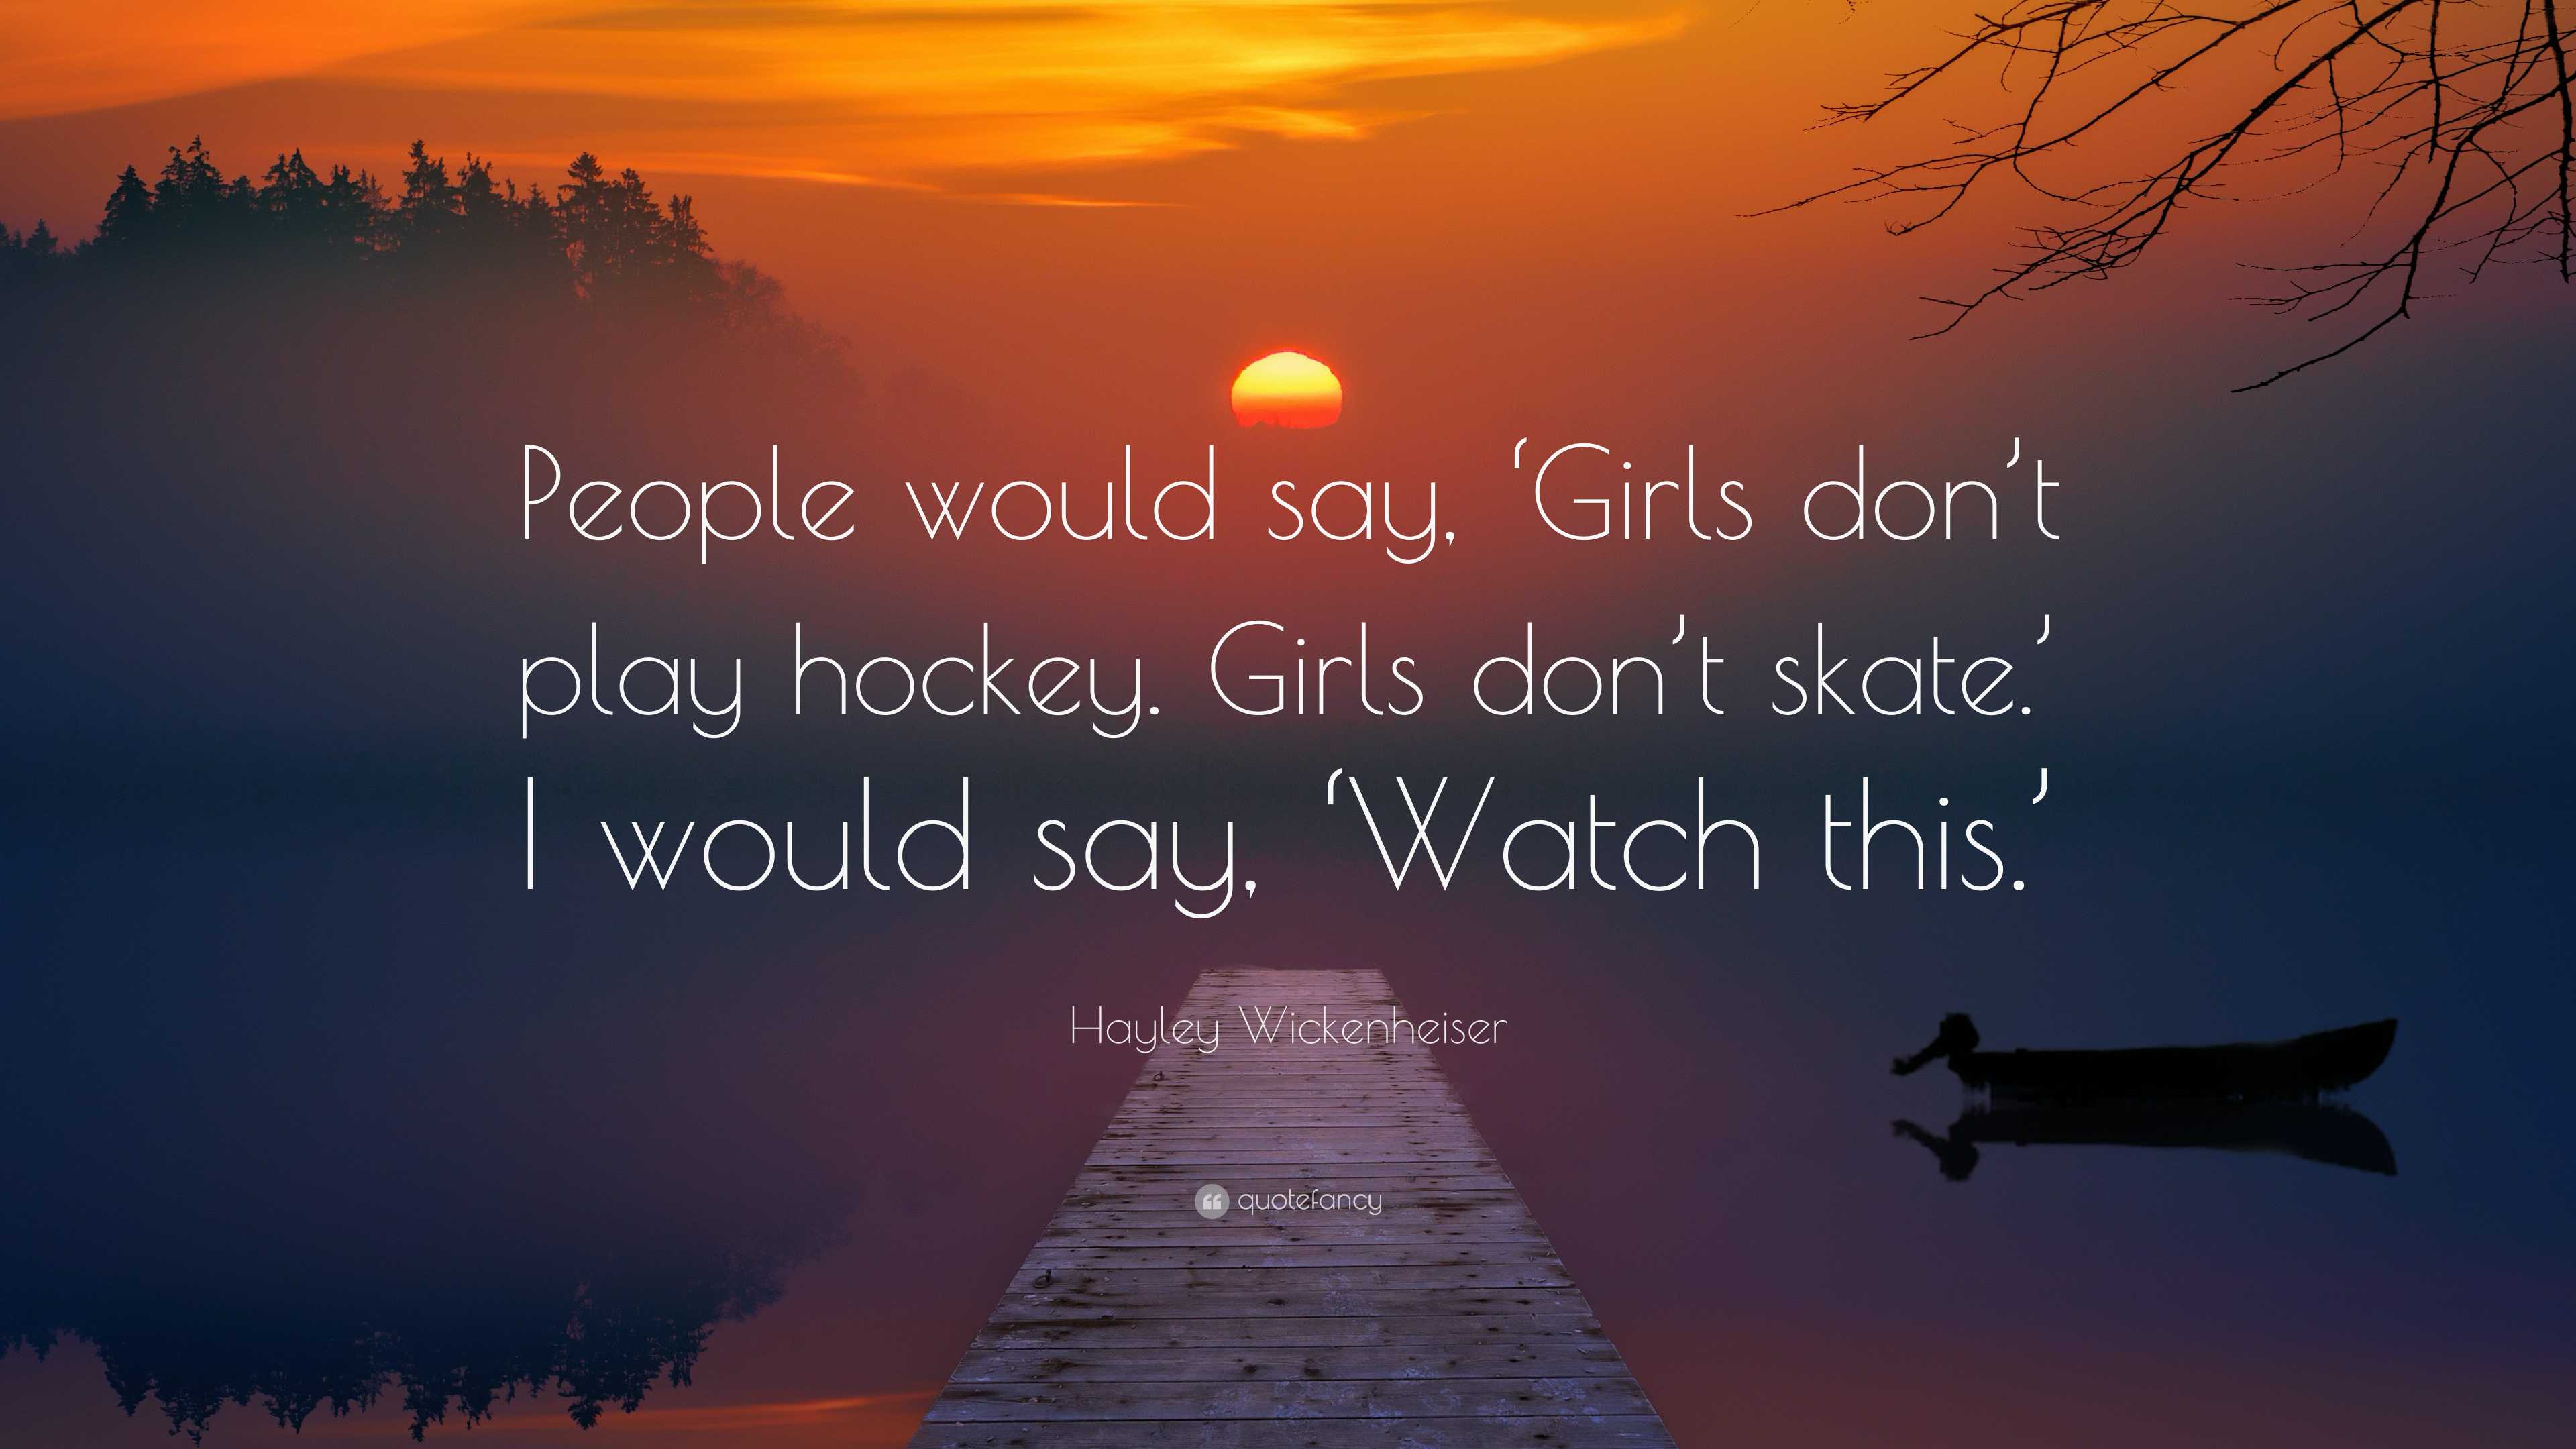 Hayley Wickenheiser Quote: “People would say, ‘Girls don’t play hockey ...